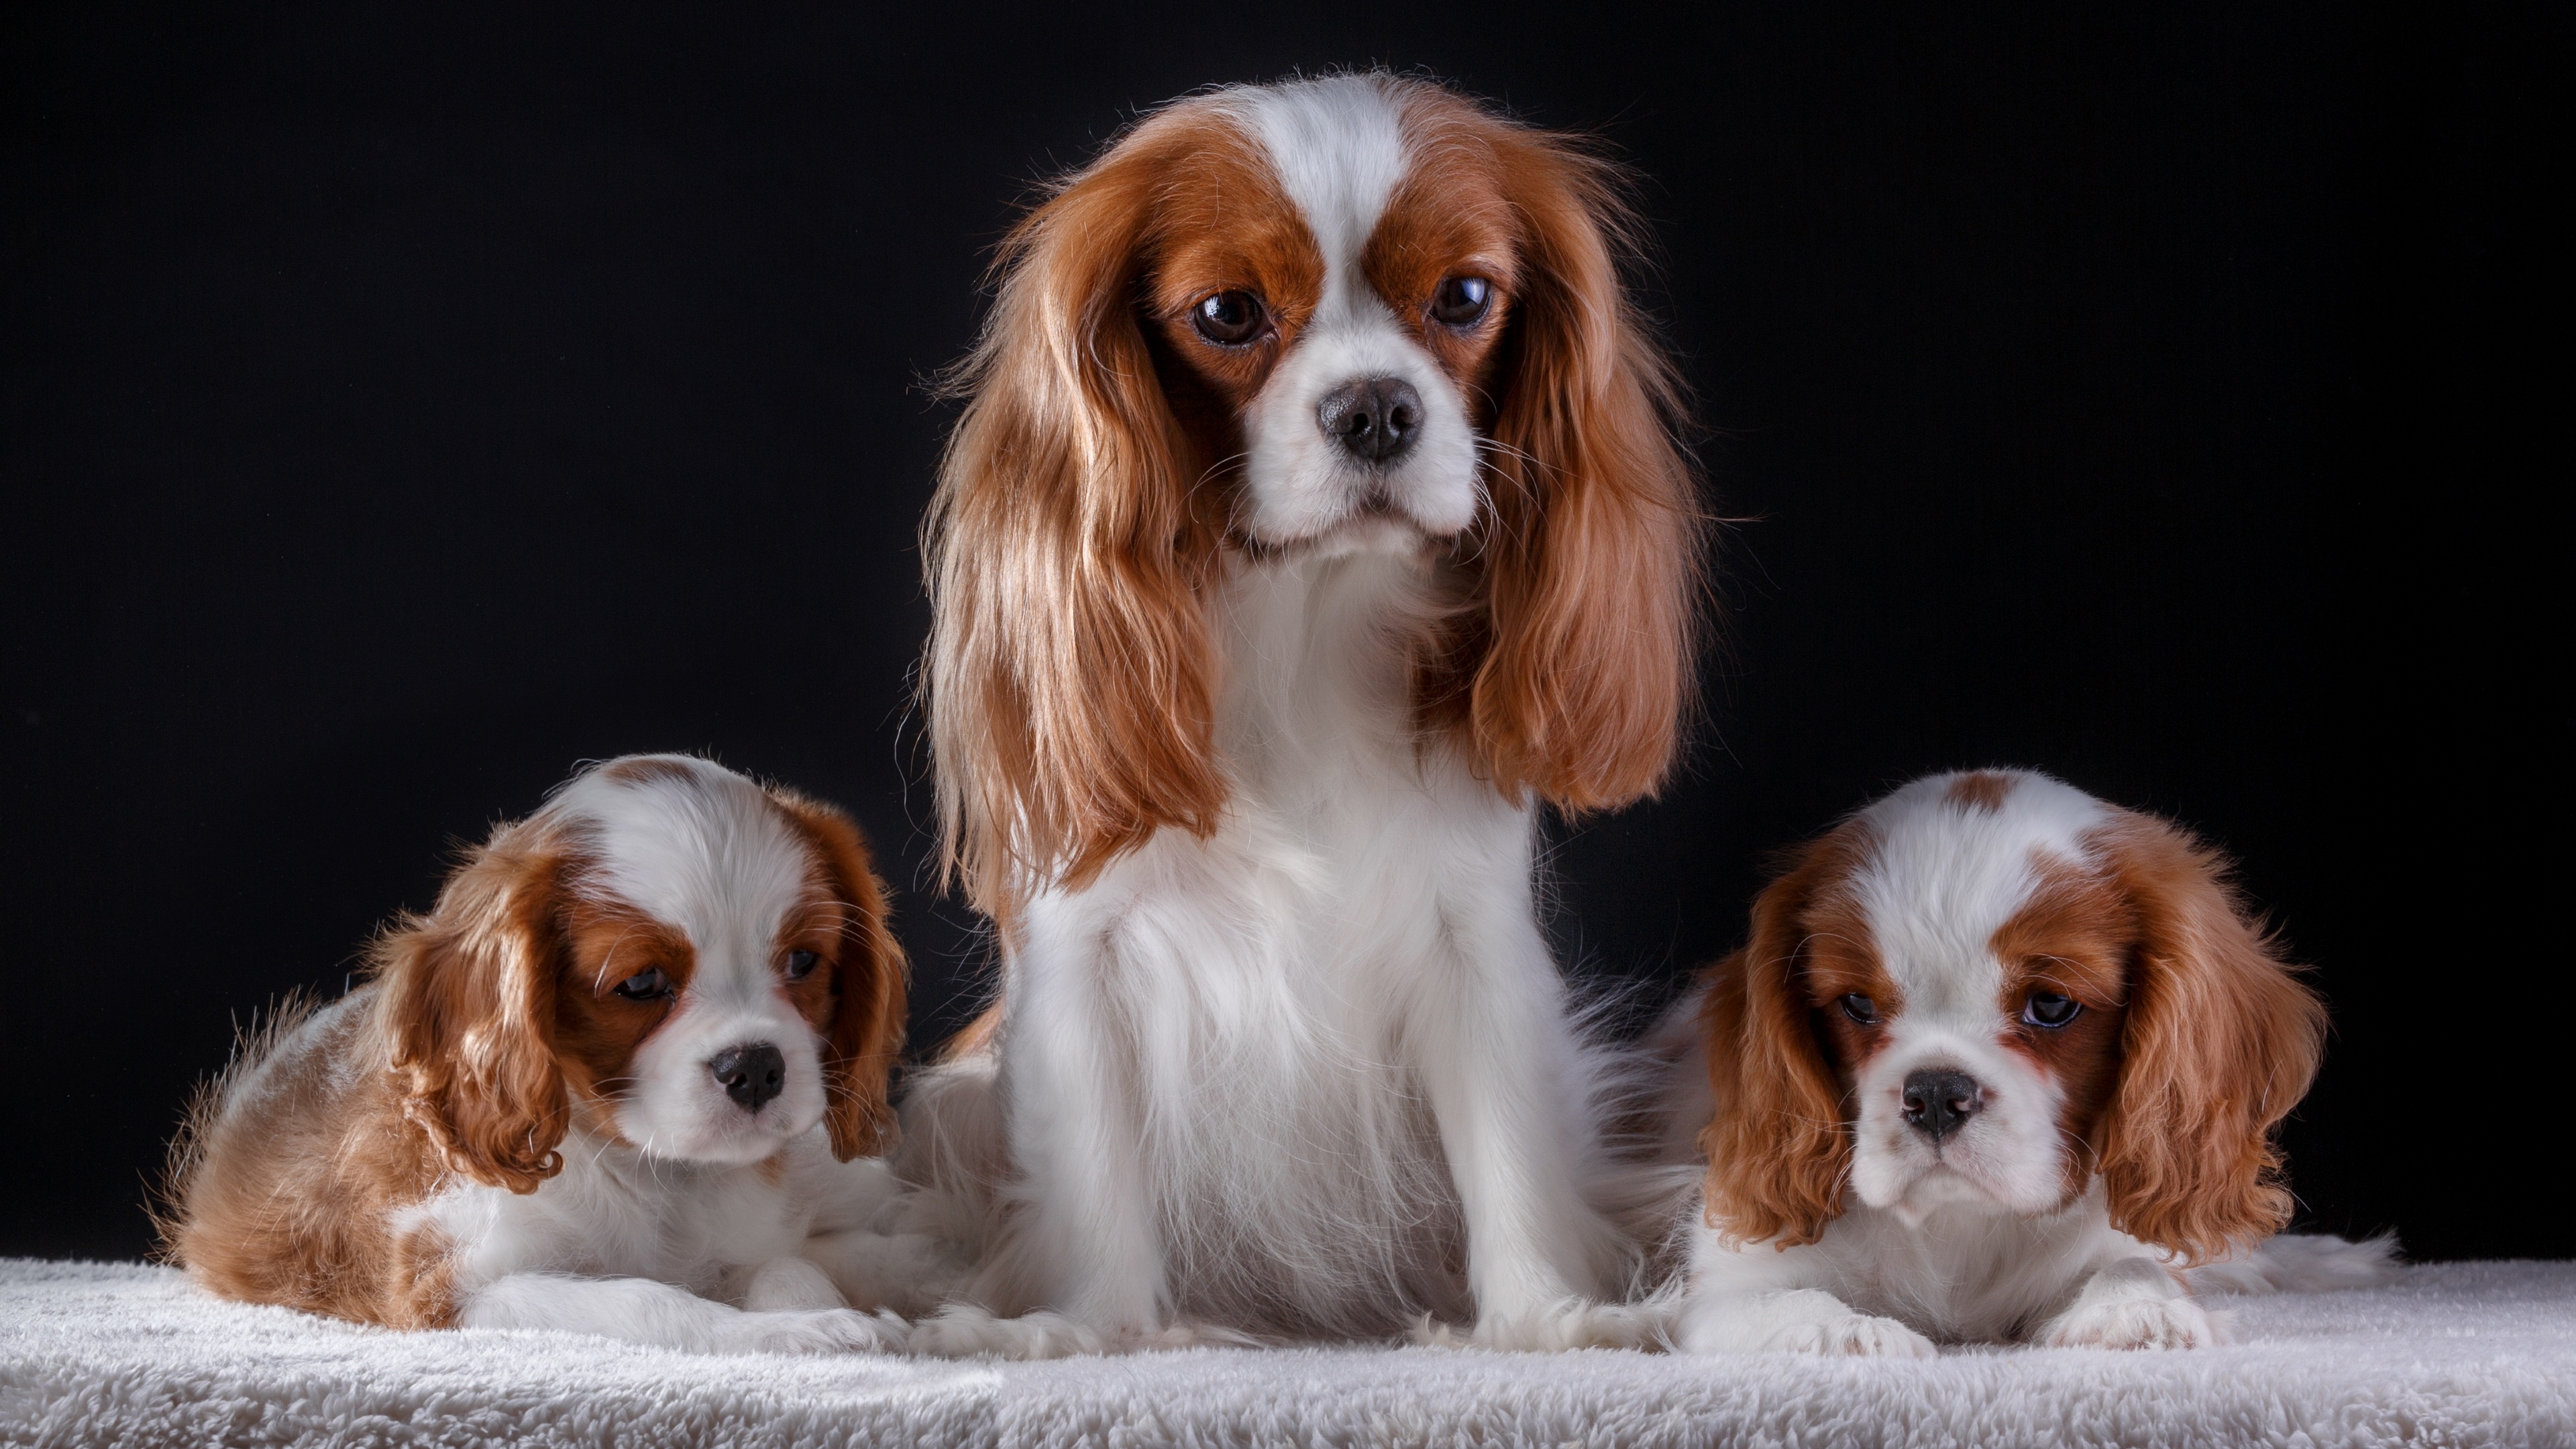 Free photo Picture of Cavalier King Charles Spaniel puppies.